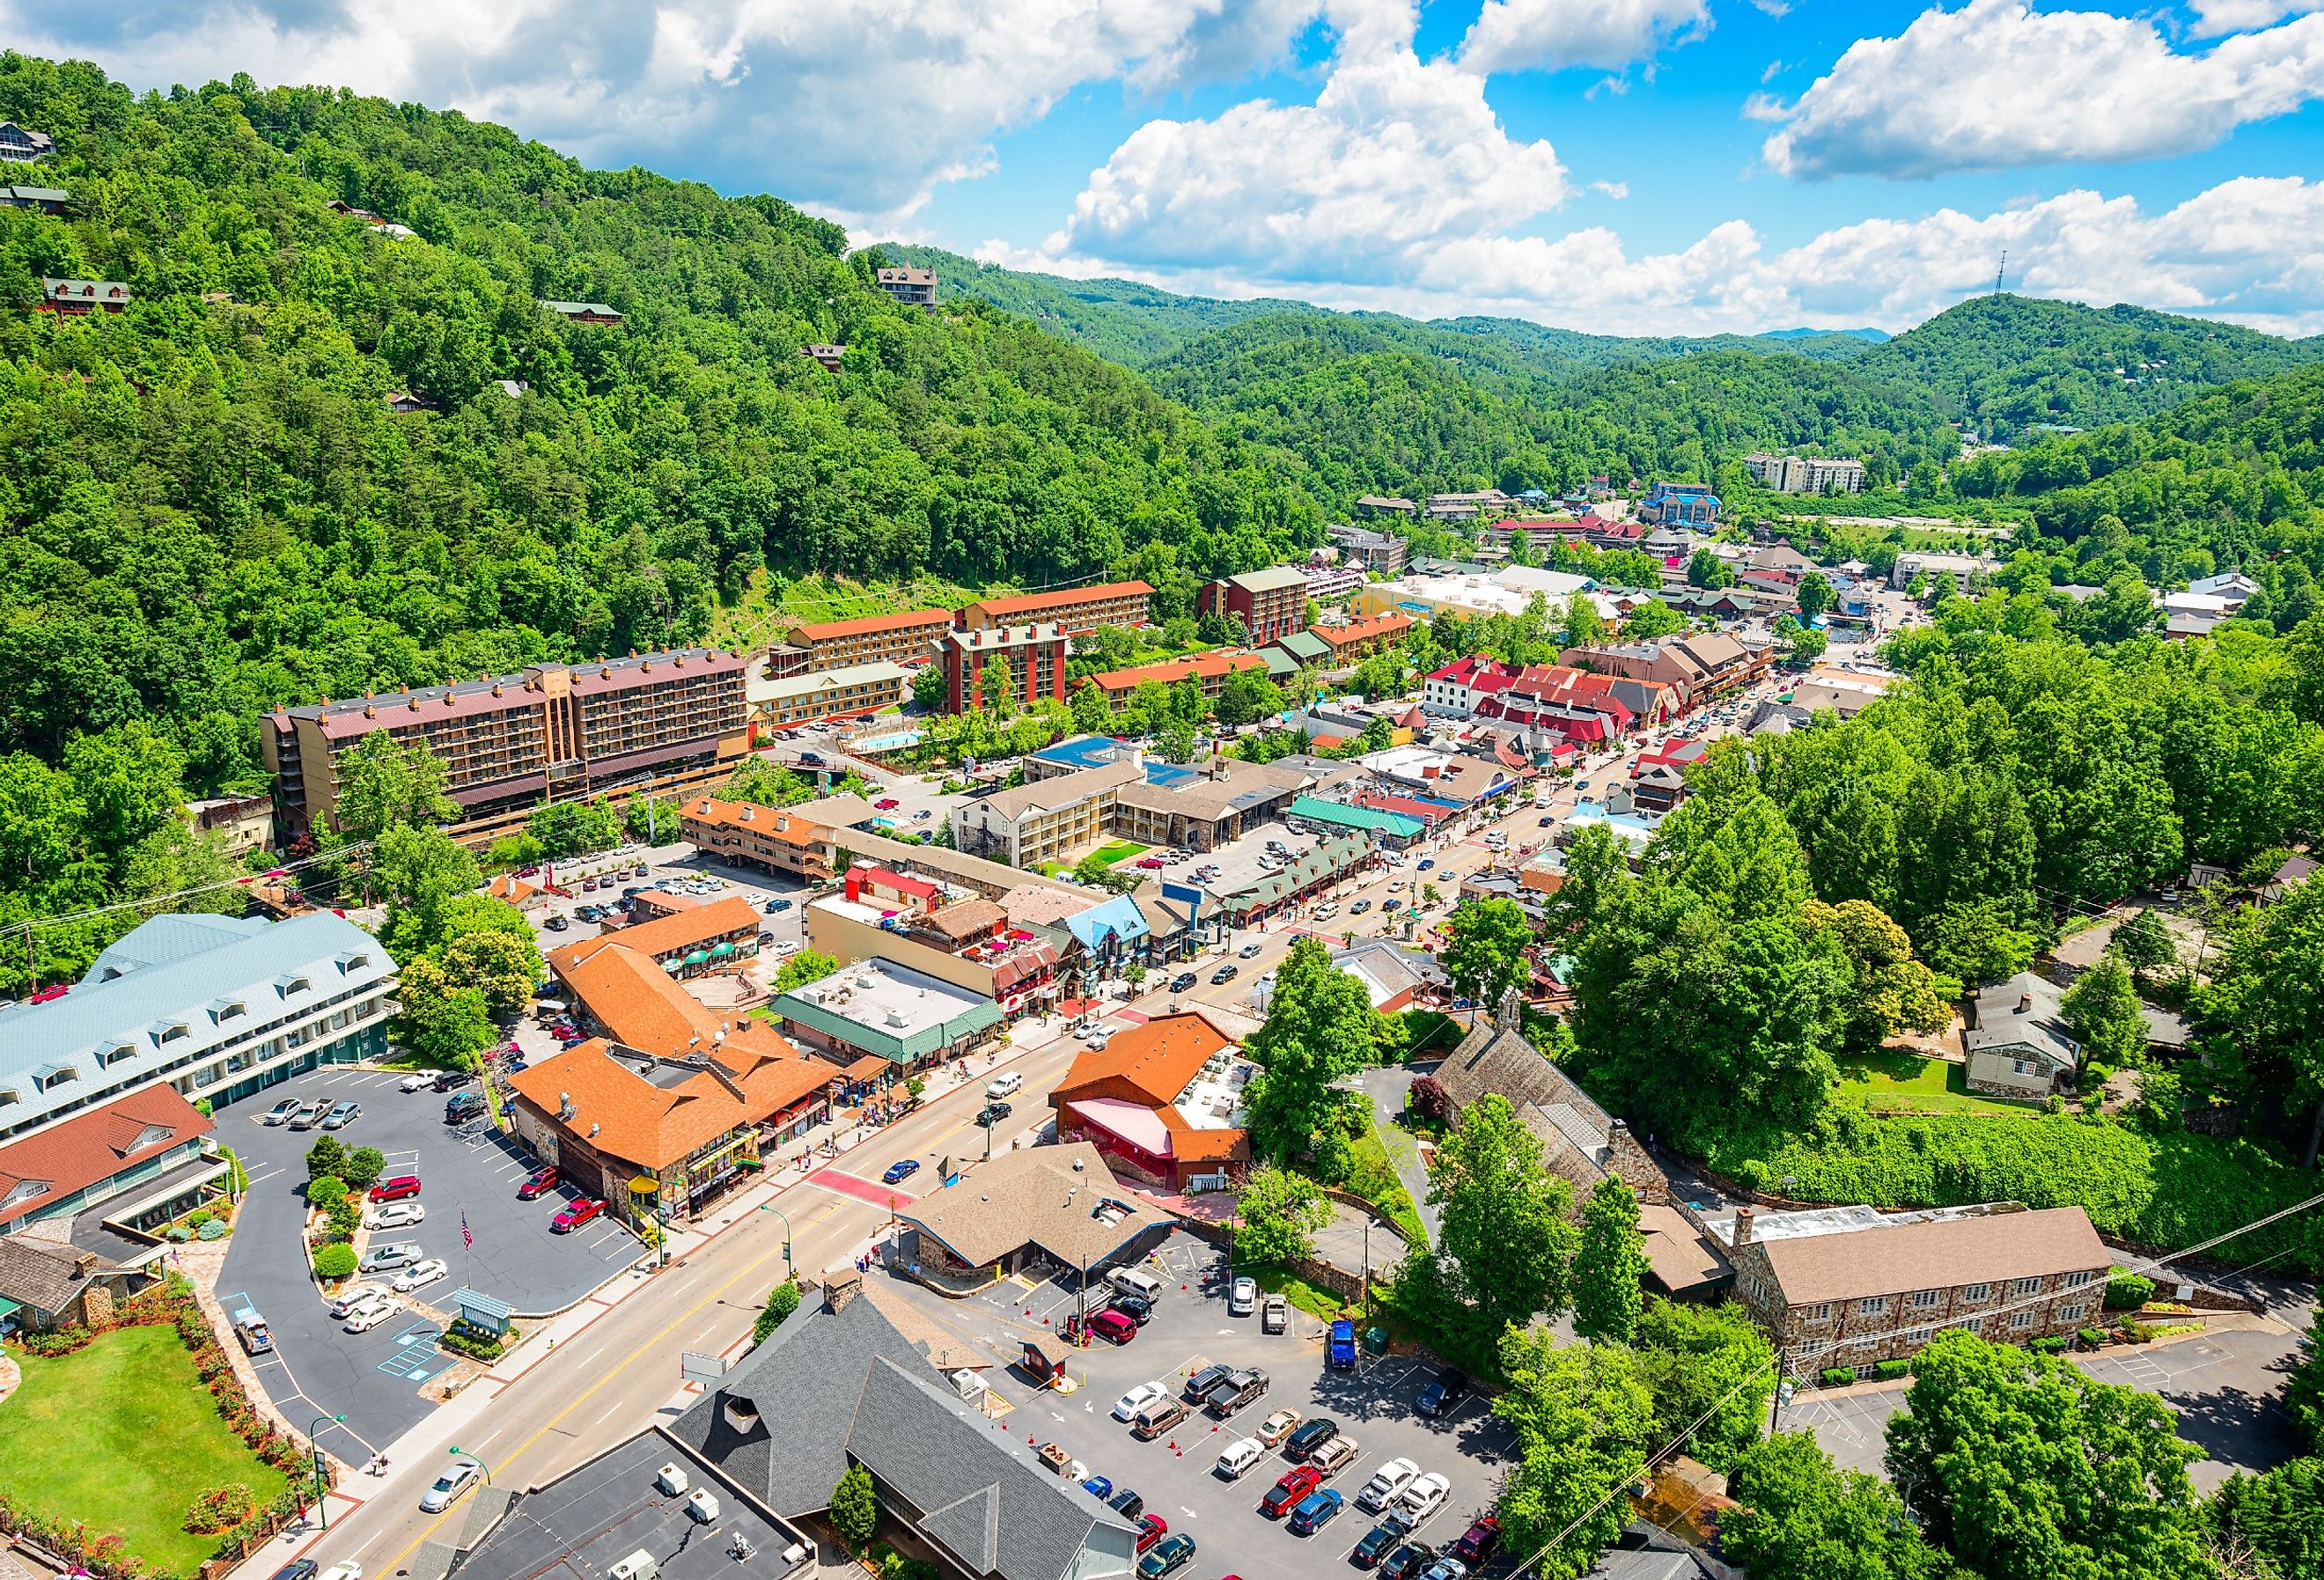 Aerial view of Gatlinburg, Tennessee surrounded by trees and mountains on a sunny day.